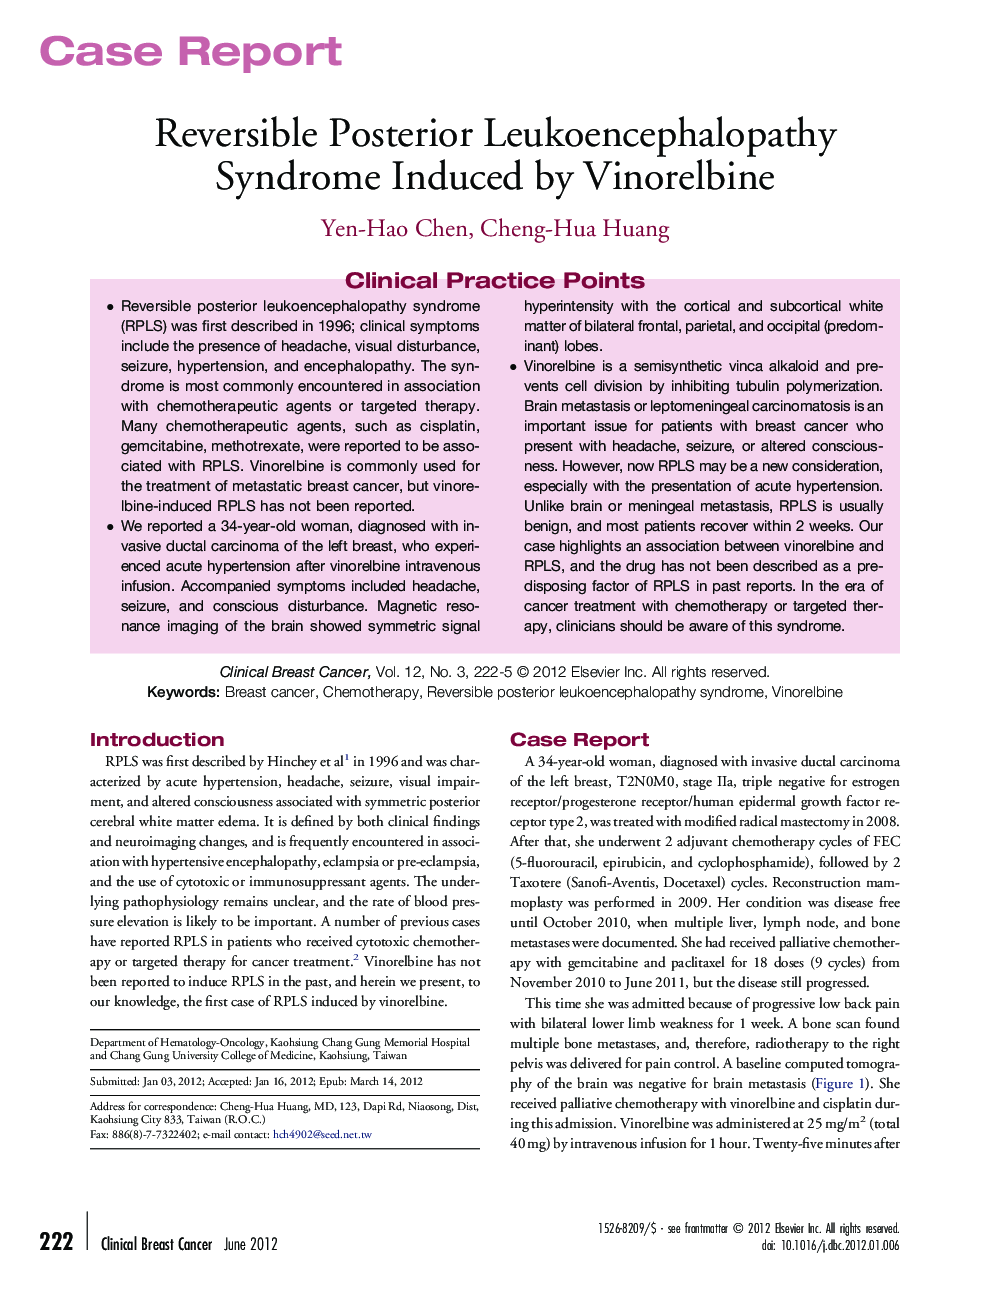 Reversible Posterior Leukoencephalopathy Syndrome Induced by Vinorelbine